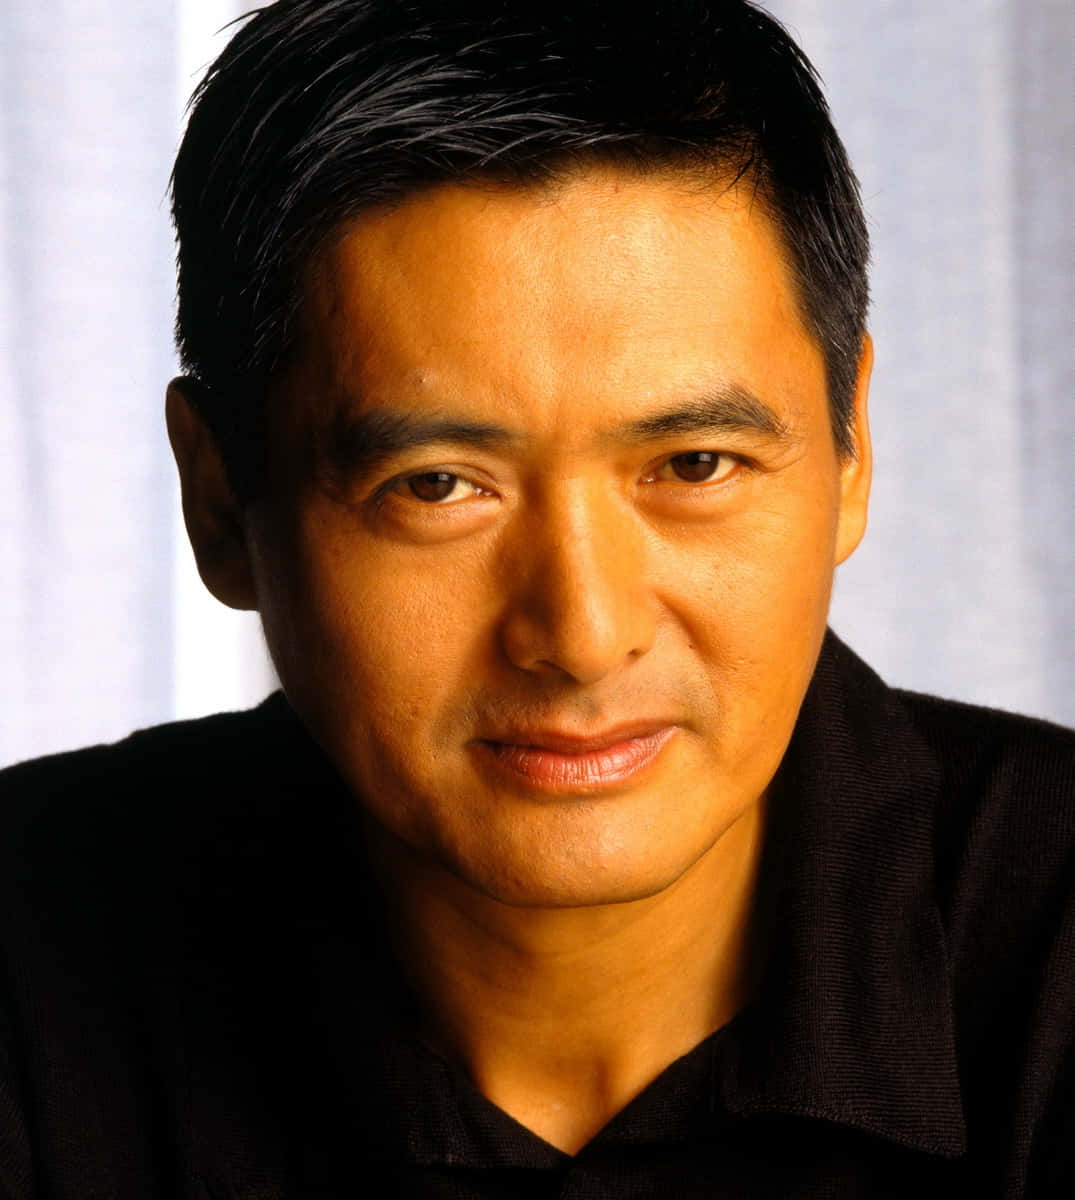 Distinguished Hong Kong actor Chow Yun-fat in a contemplative pose. Wallpaper